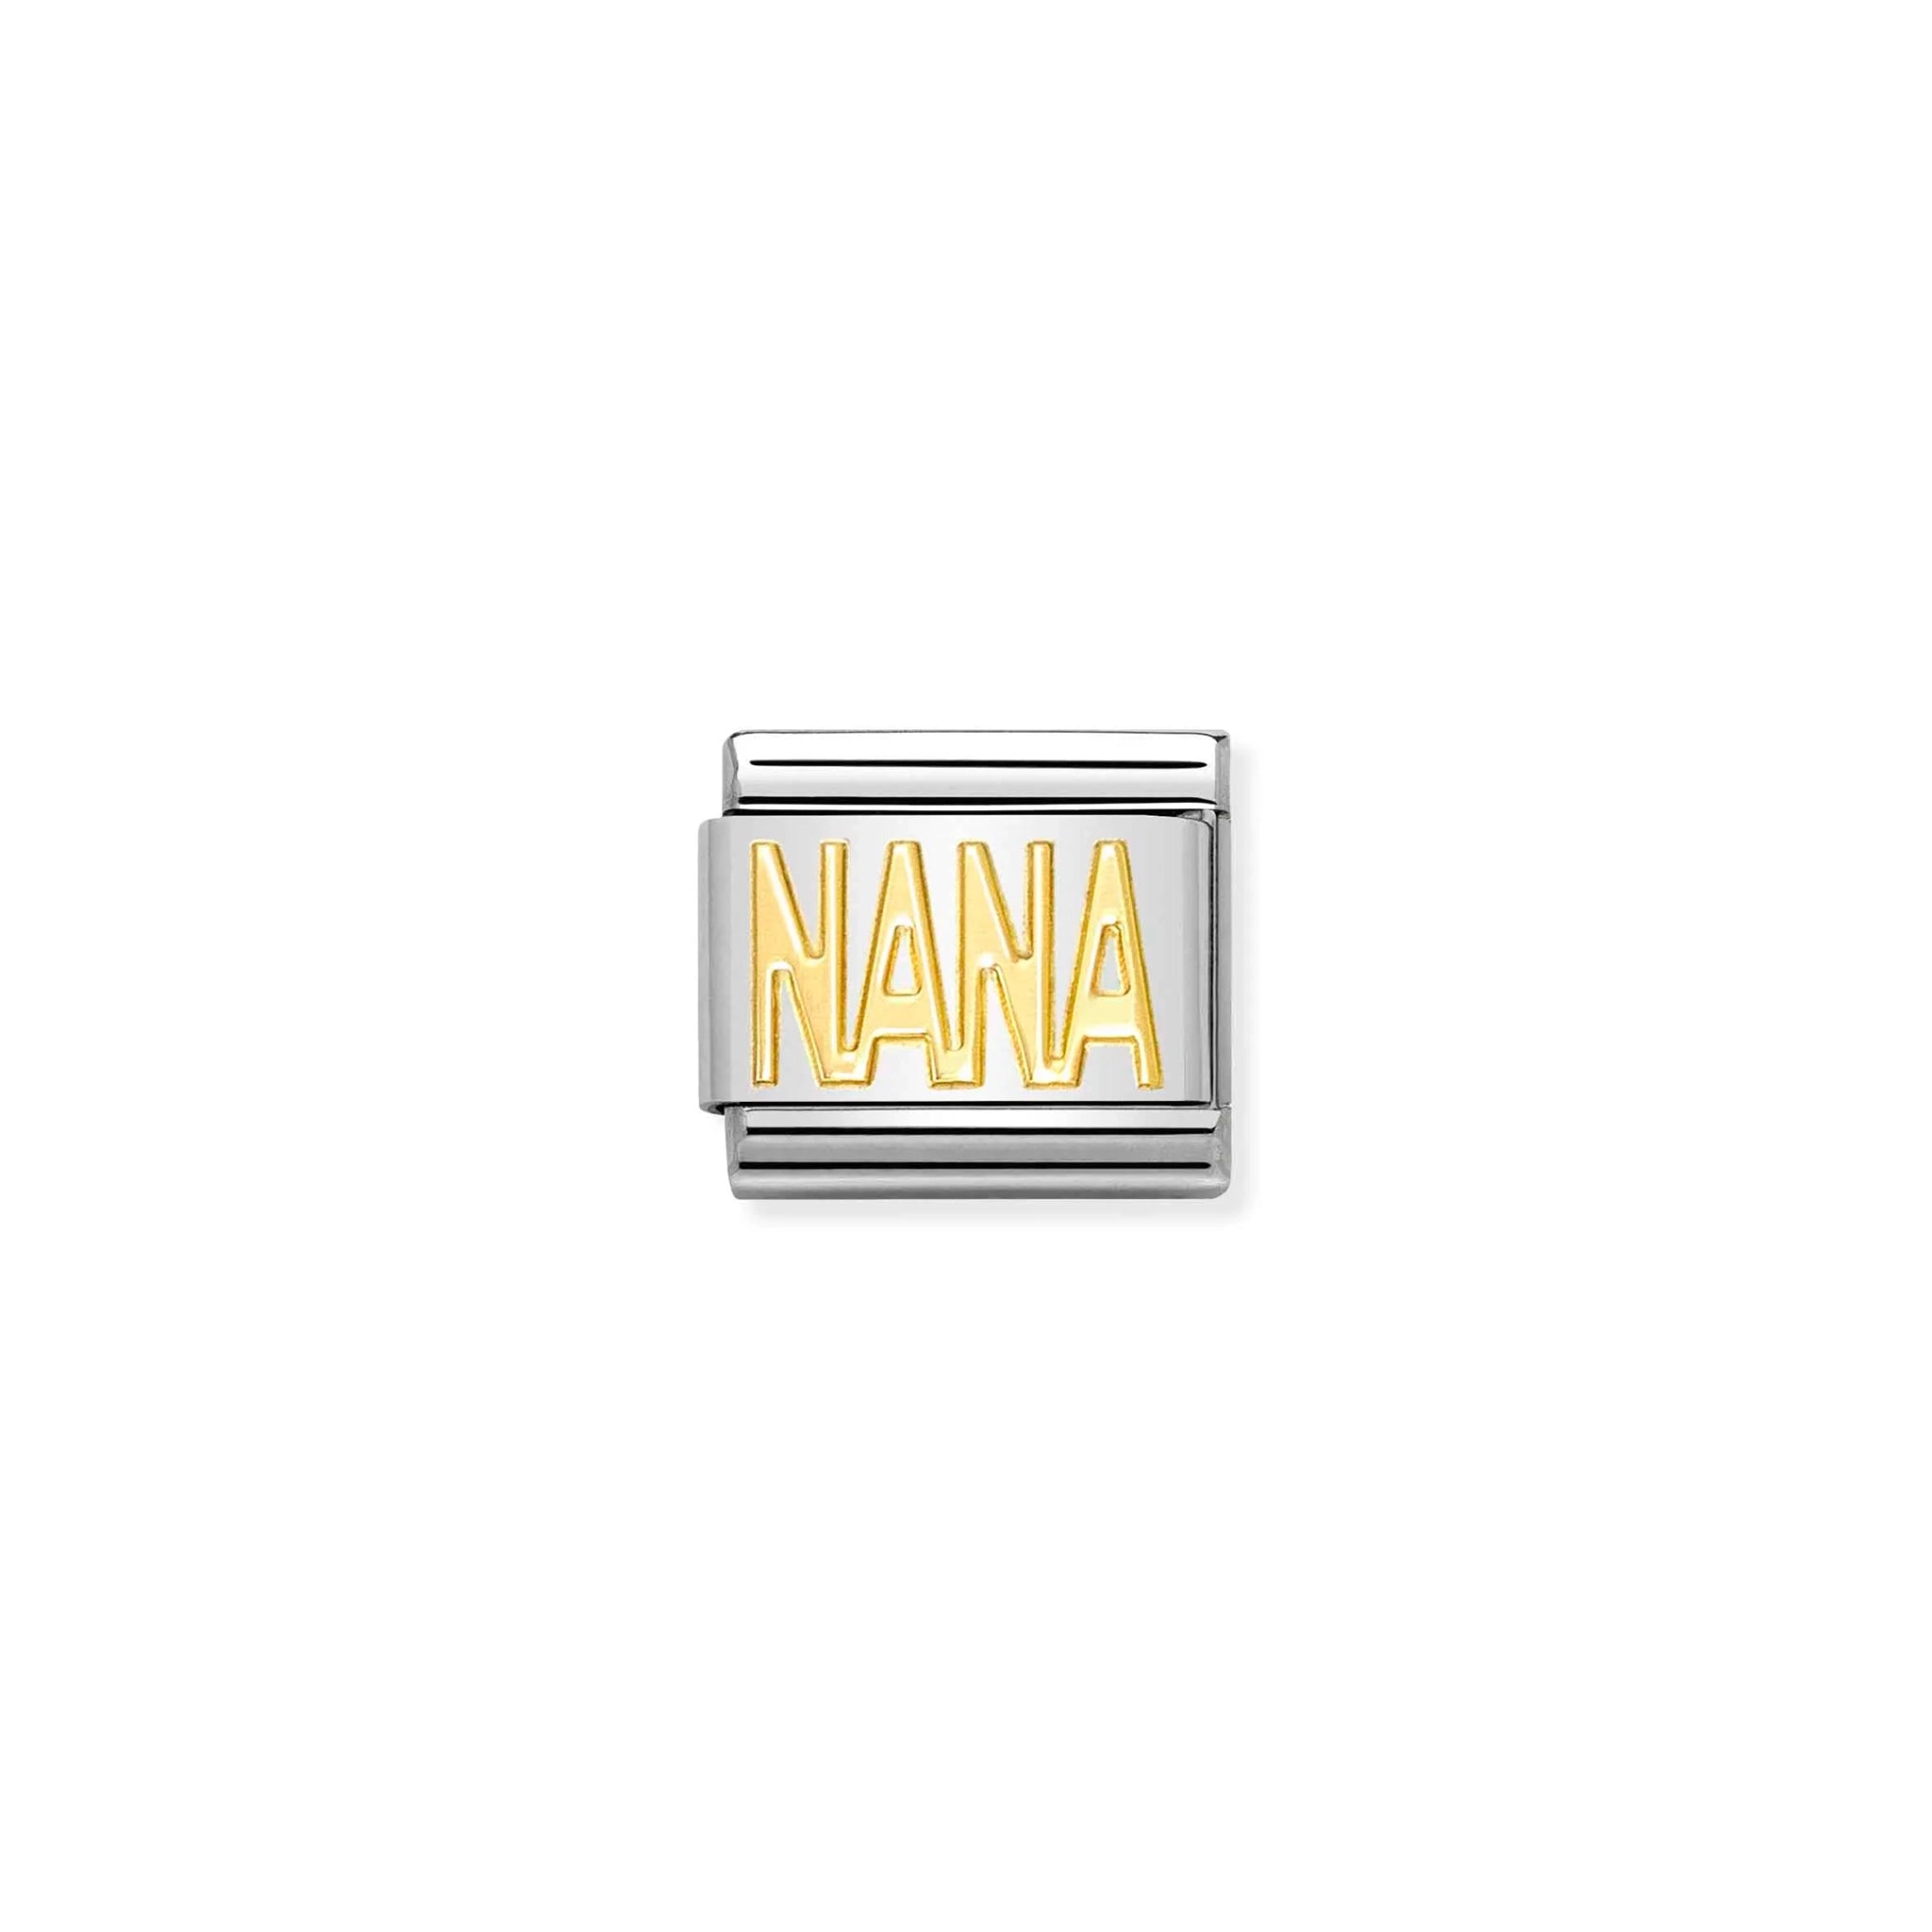 A Nomination charm link featuring the word 'NANA' in plain gold capital letters